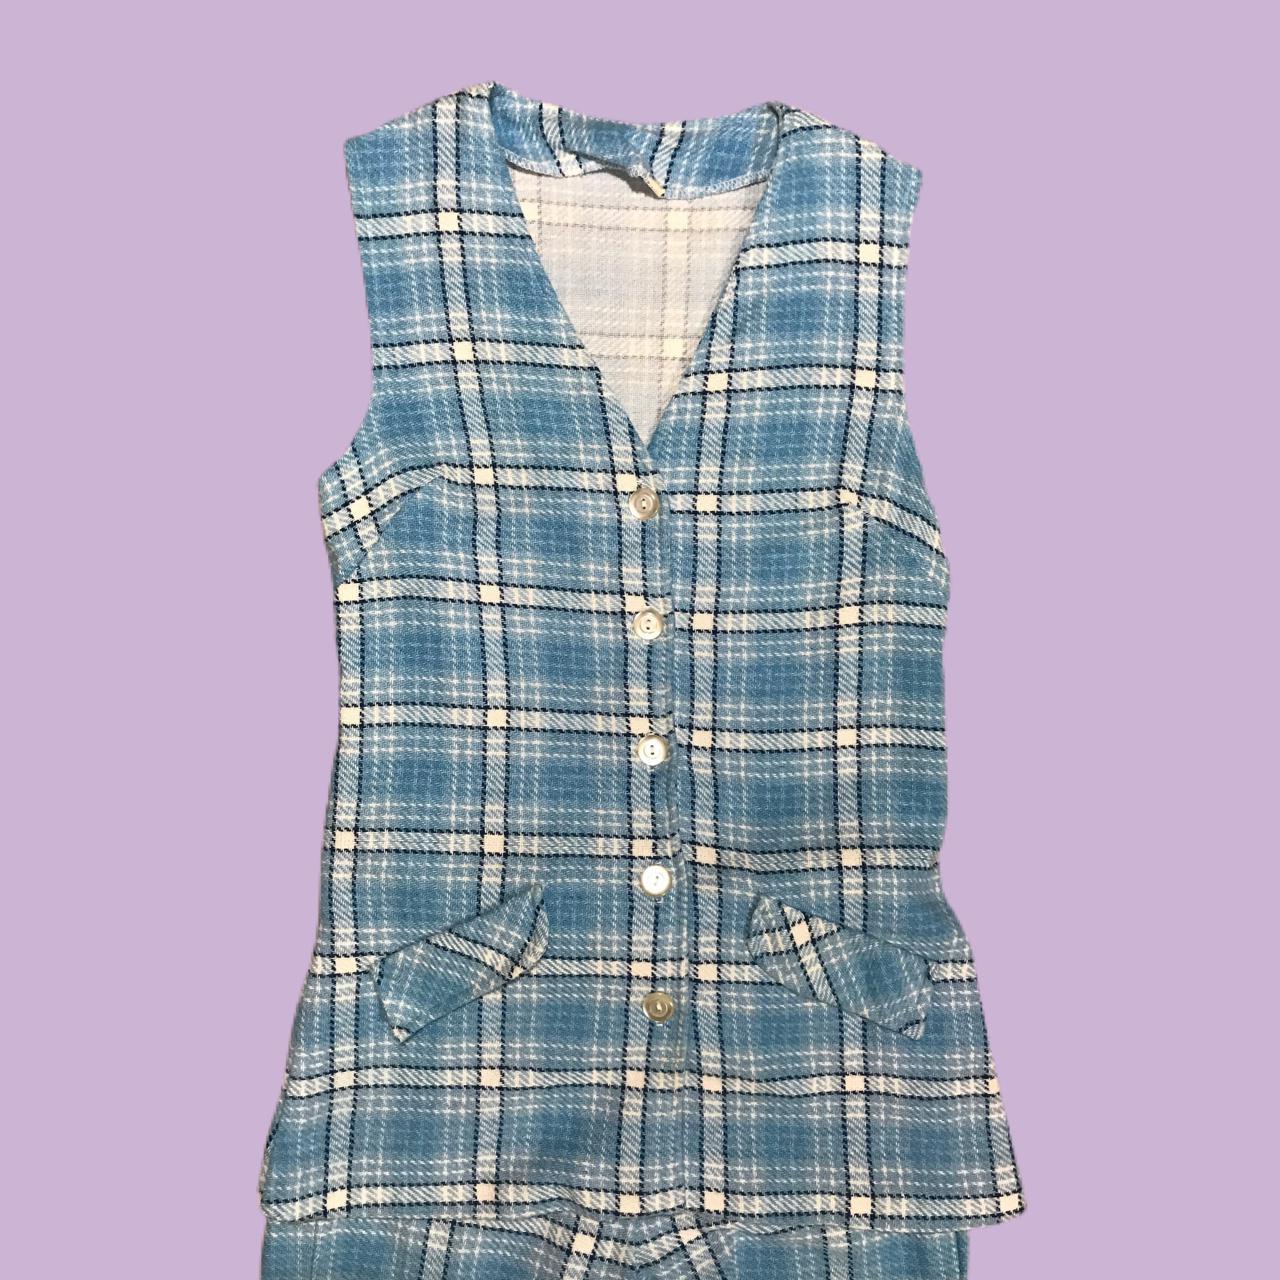 Product Image 2 - Vintage blue and white plaid